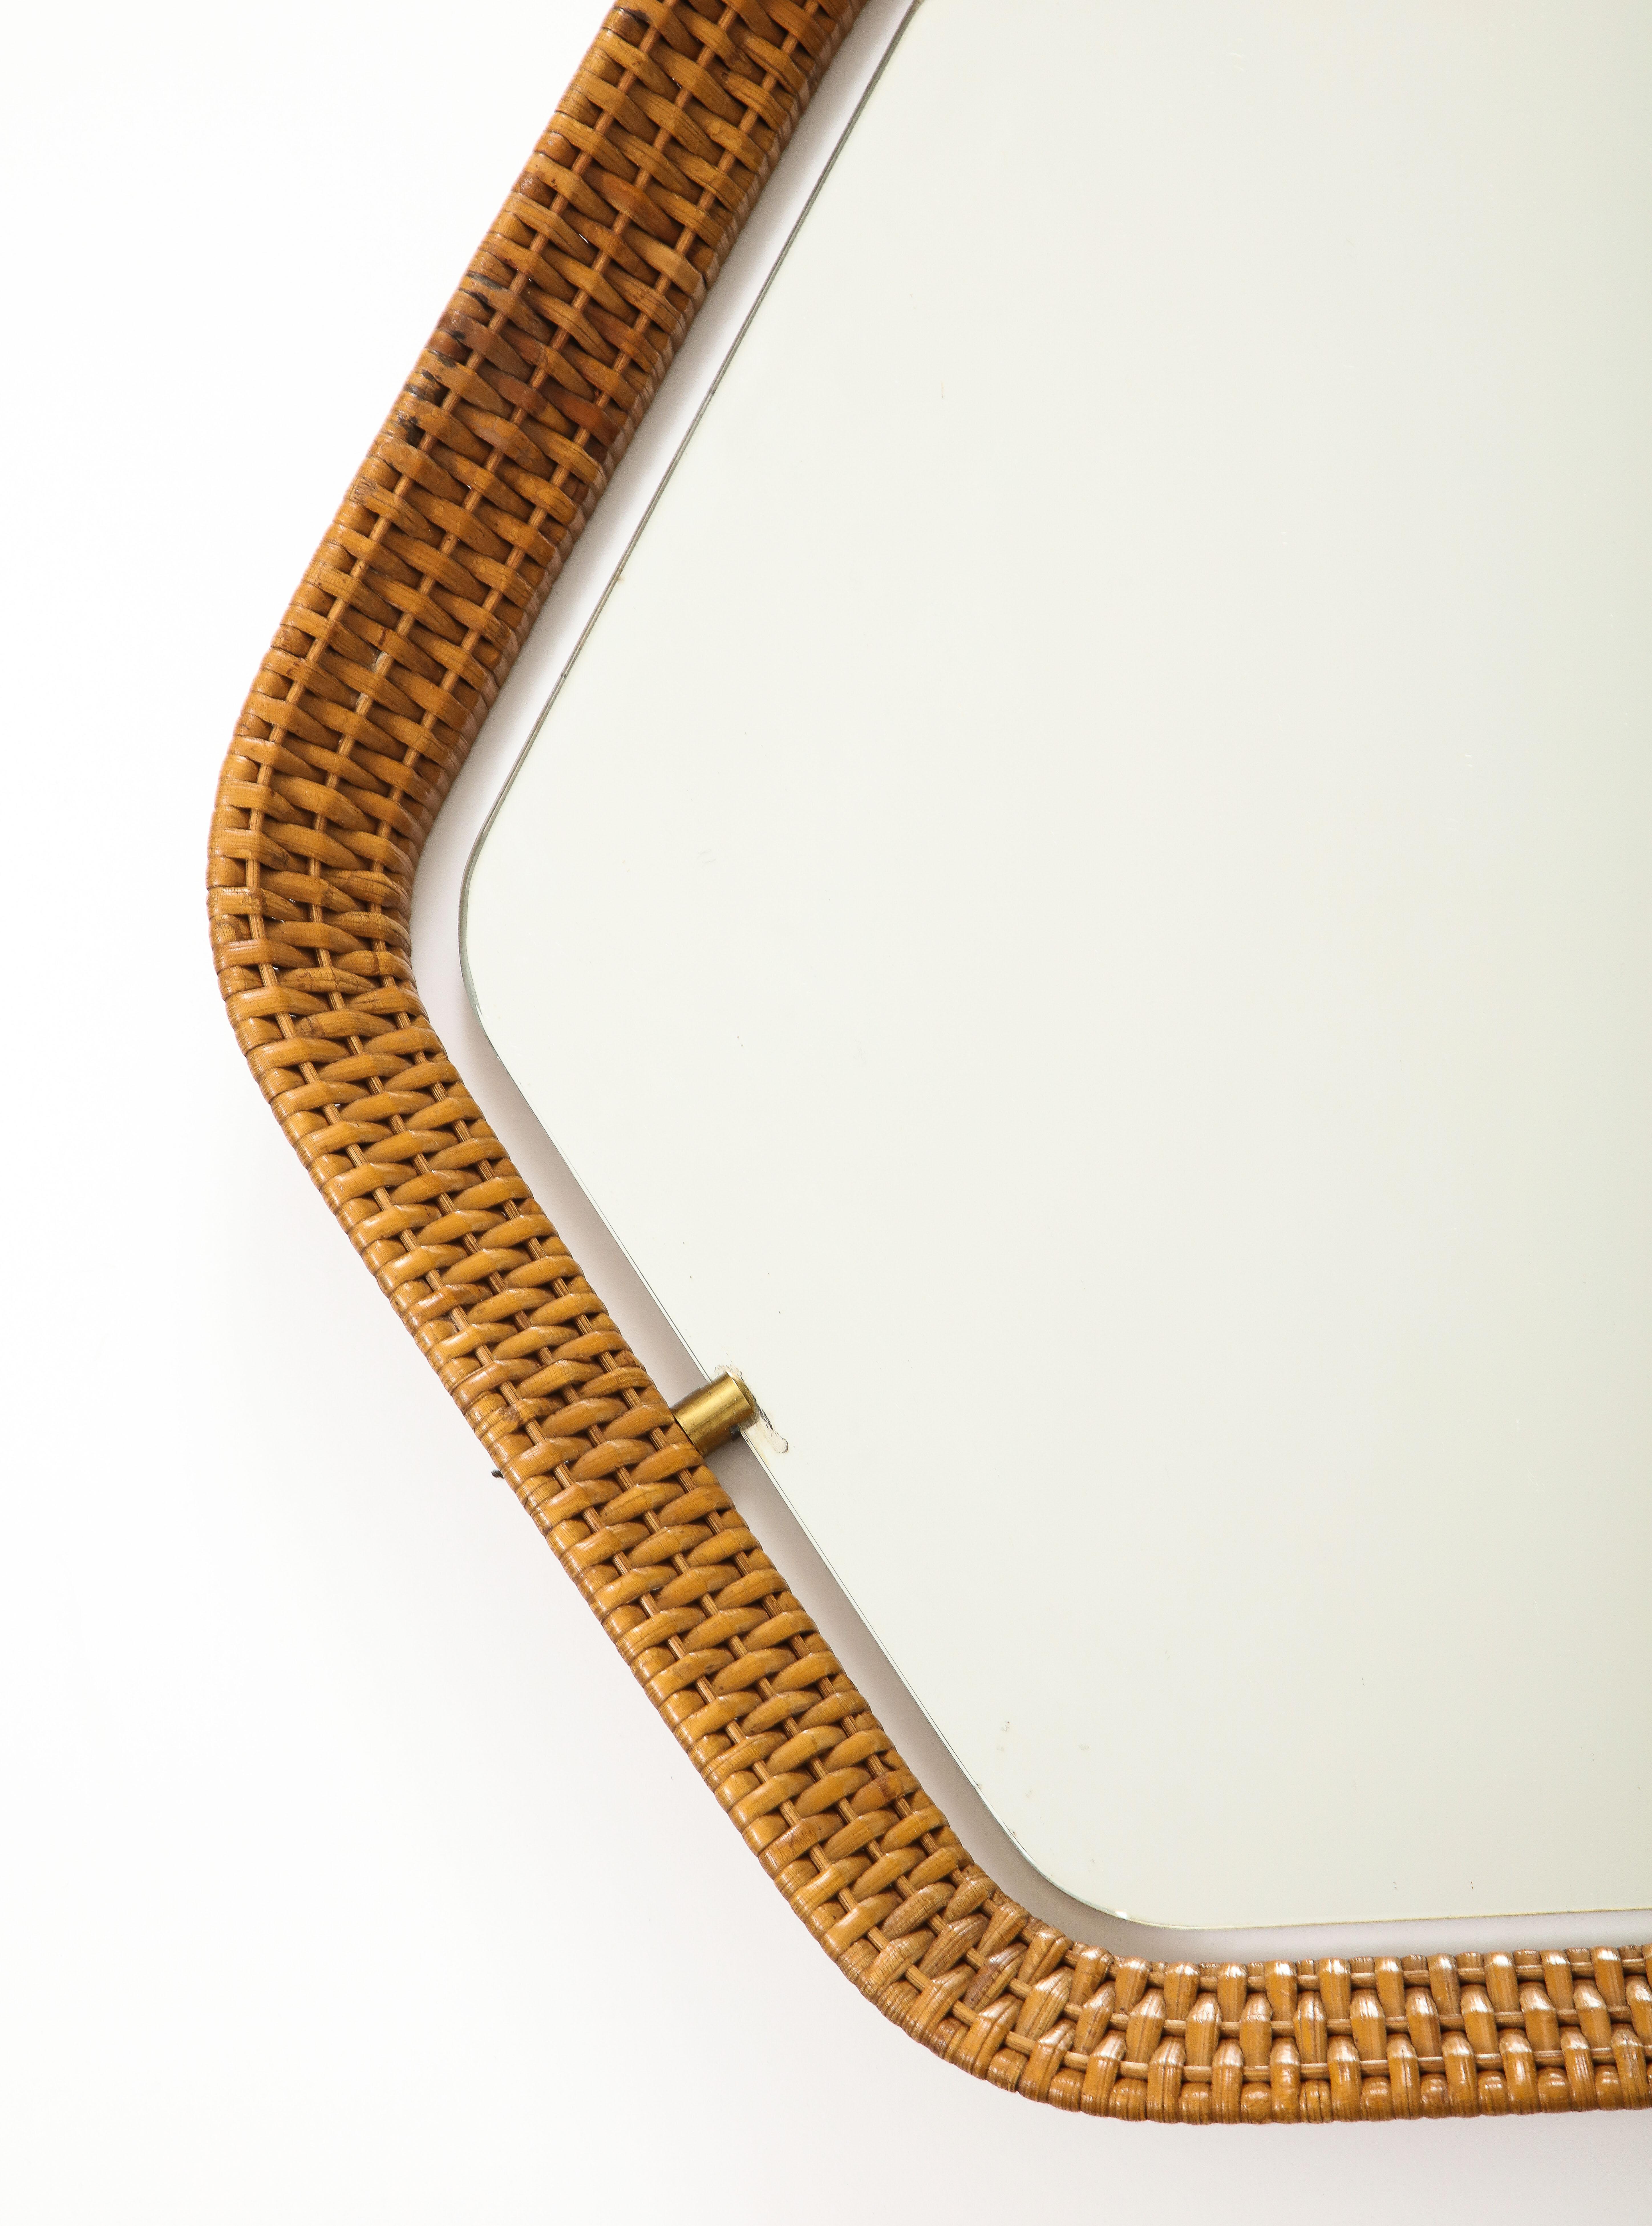 Italian Rattan and Brass Hexagon Shaped Mirror by Cantu, 1950s For Sale 4